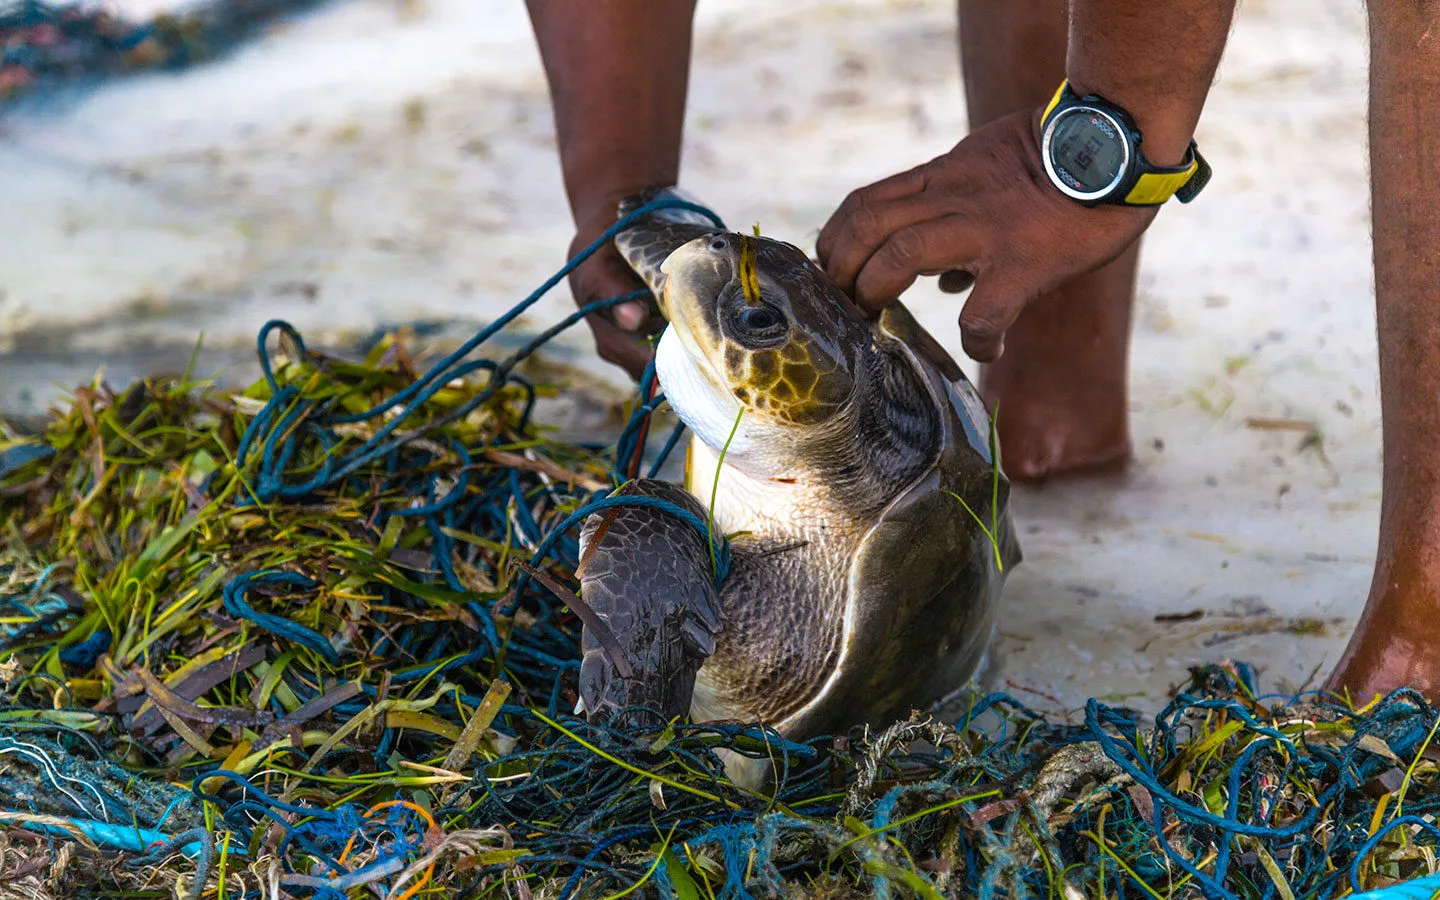 Rescuing a turtle from fishing net